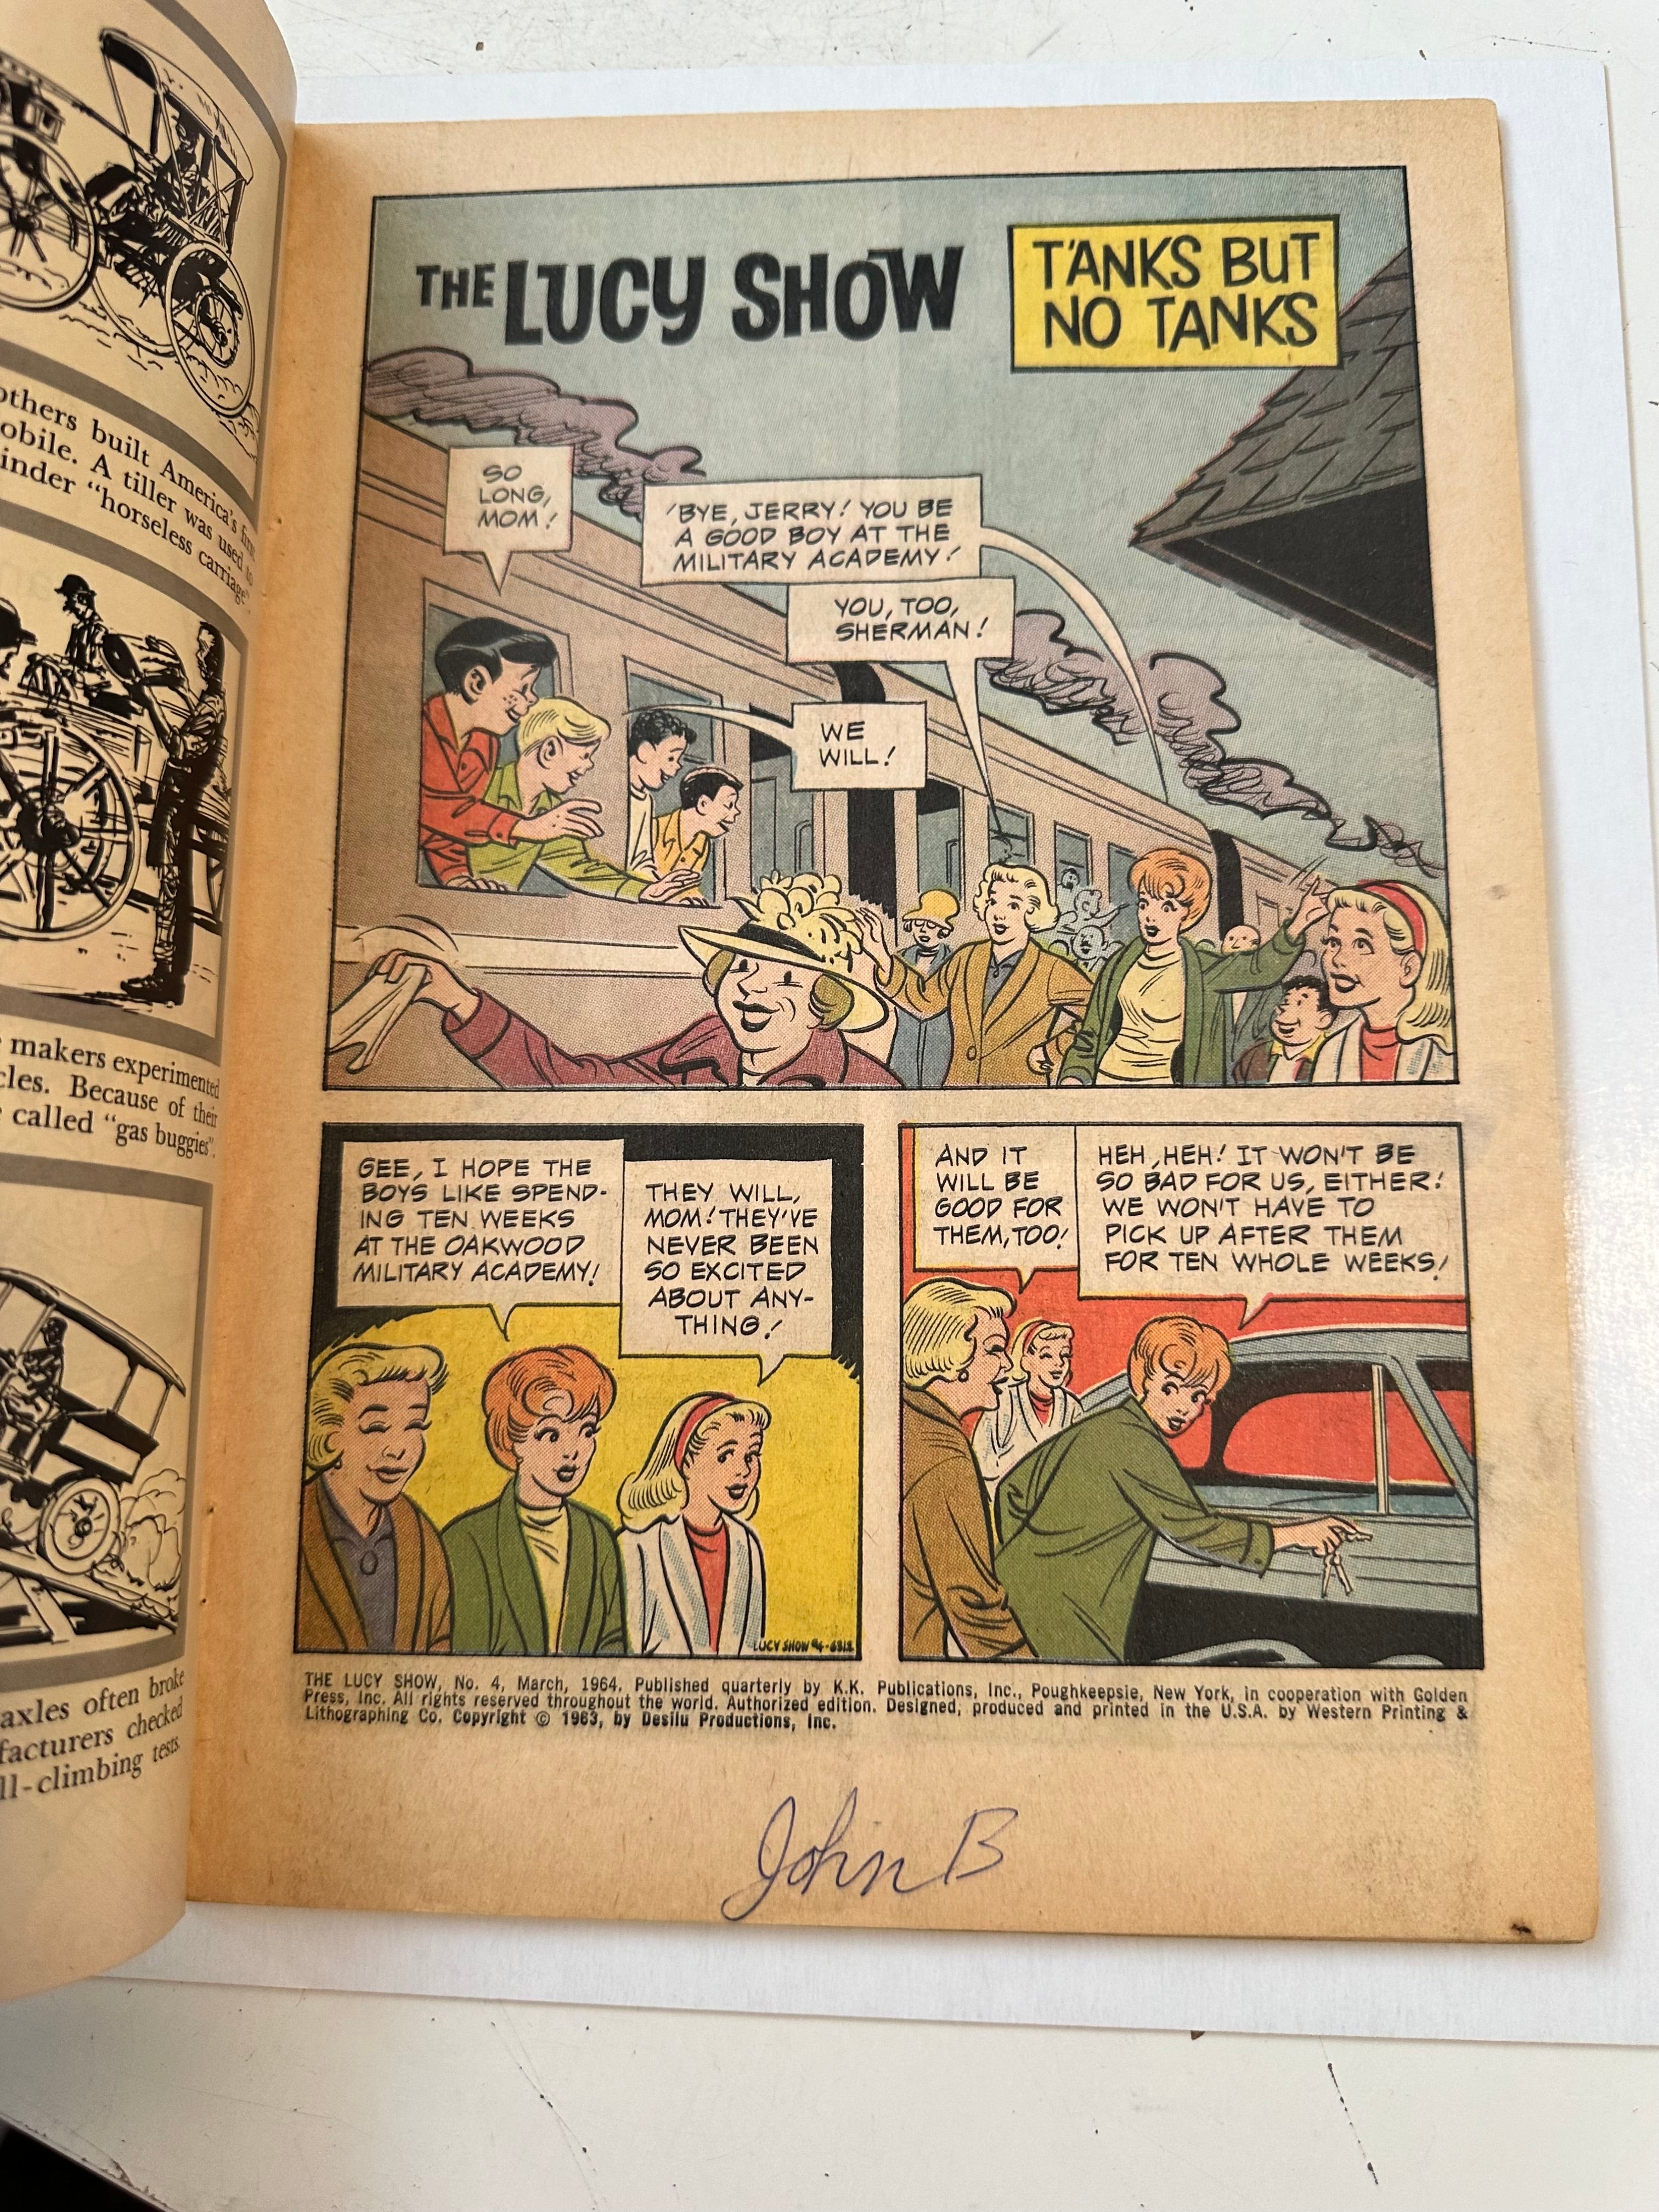 The Lucy show vintage gold key, book 1964